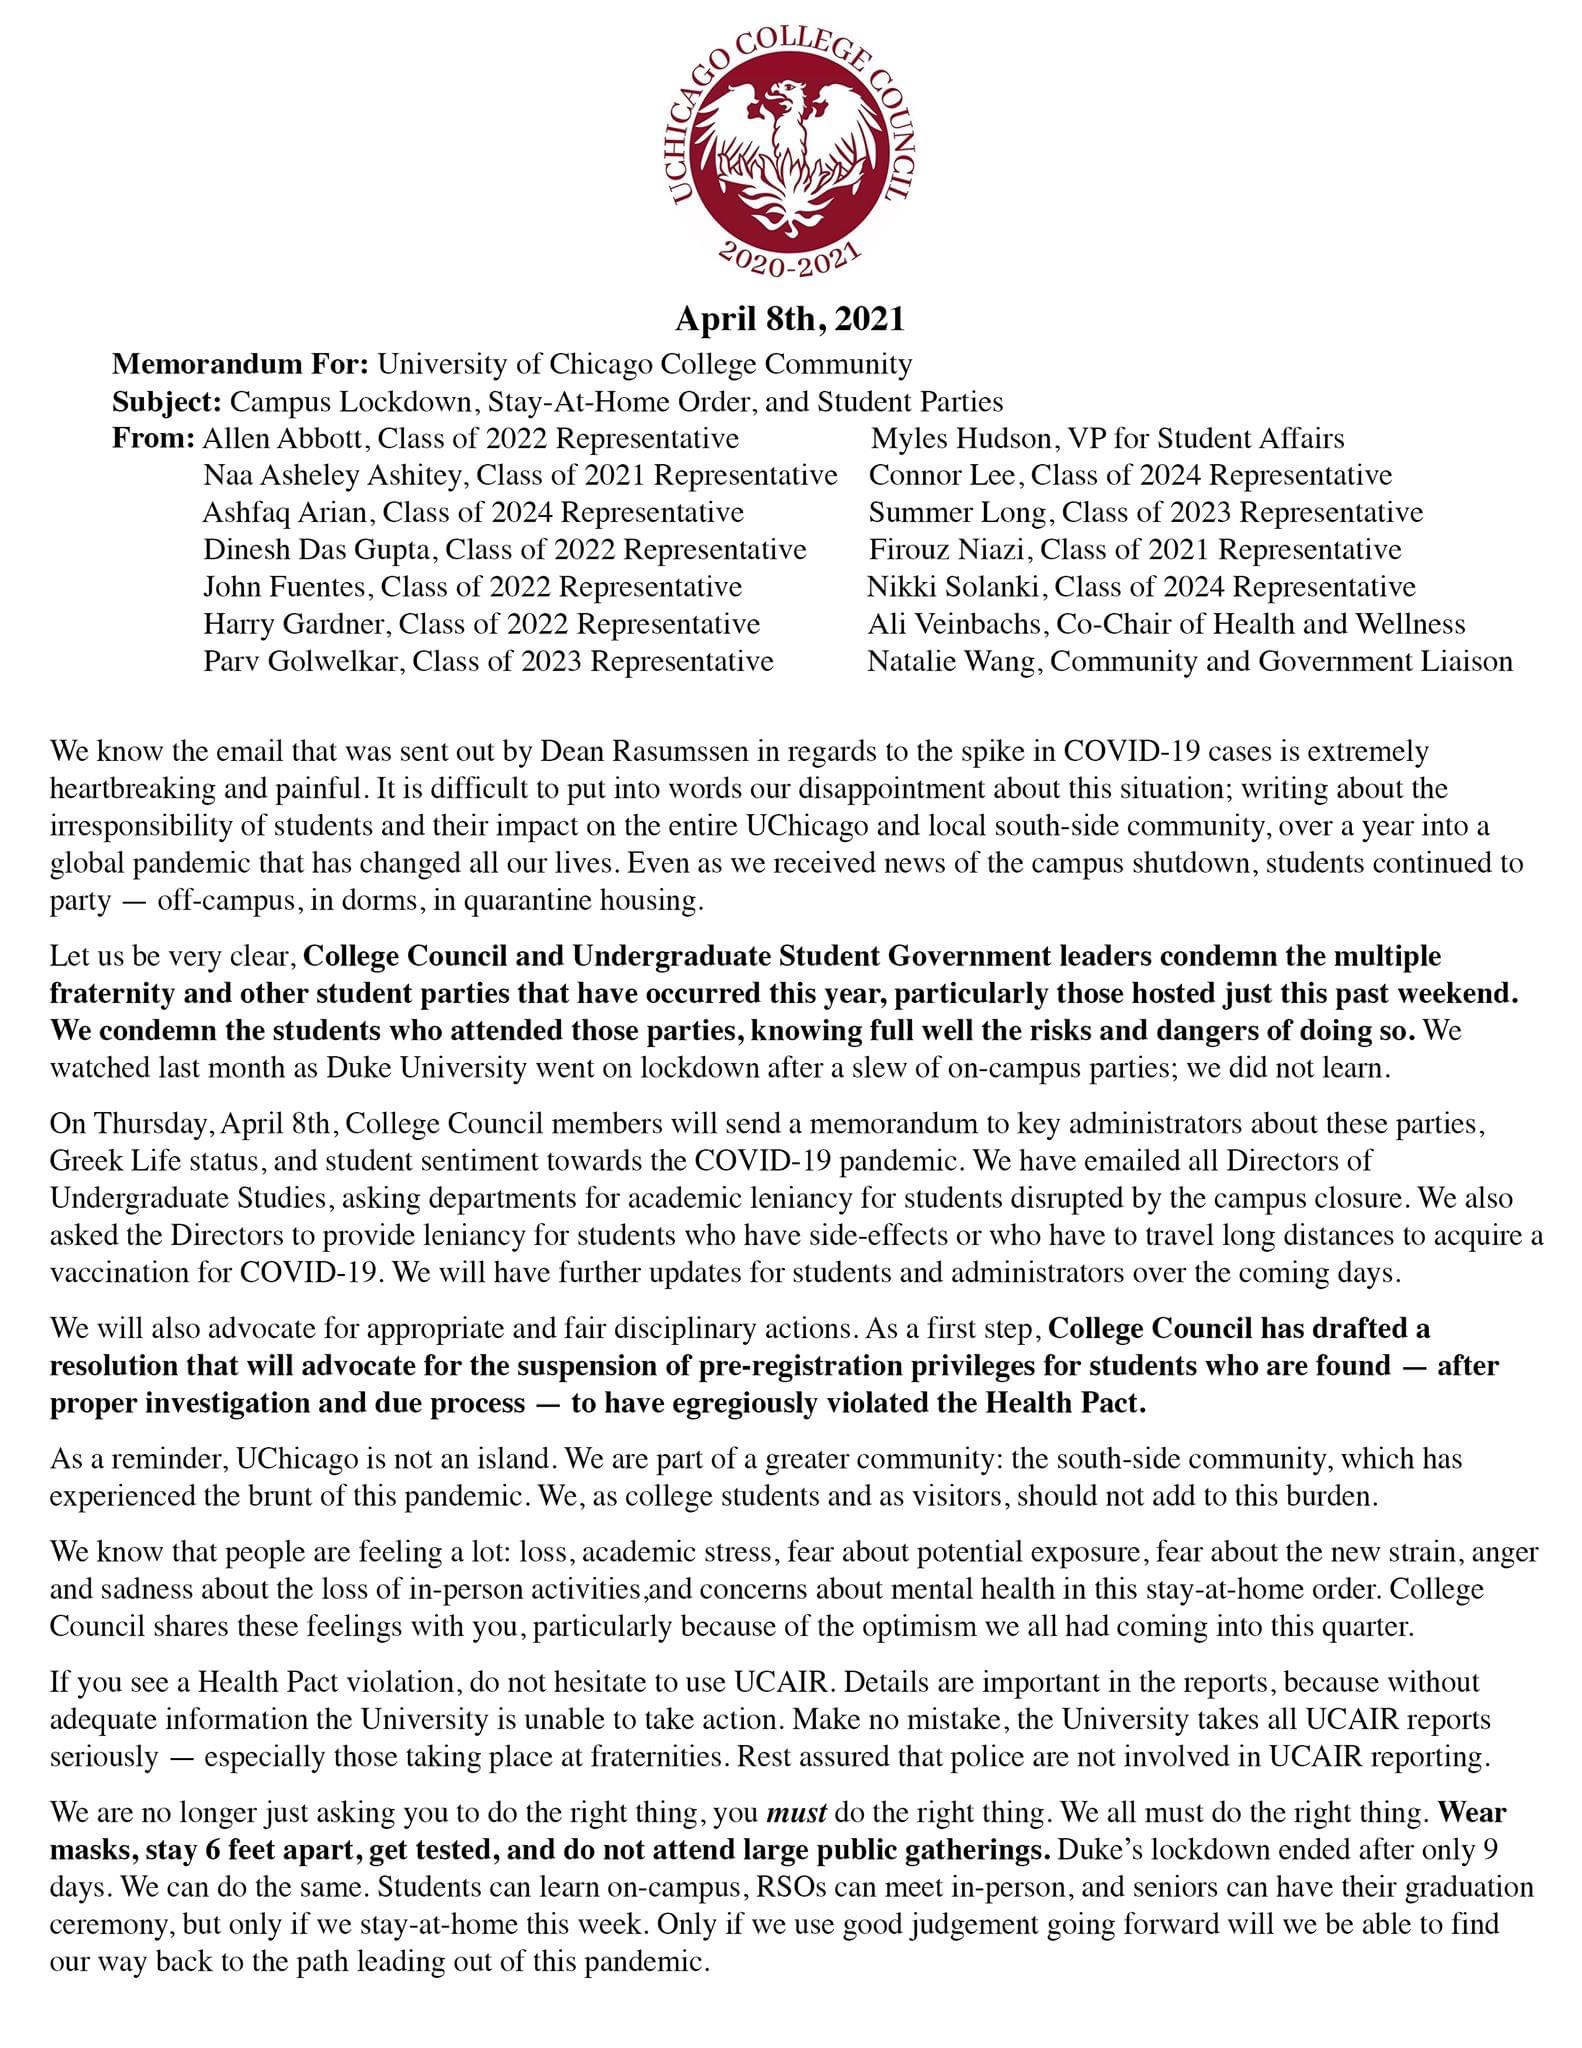 University of Chicago Student Government Letter on COVID